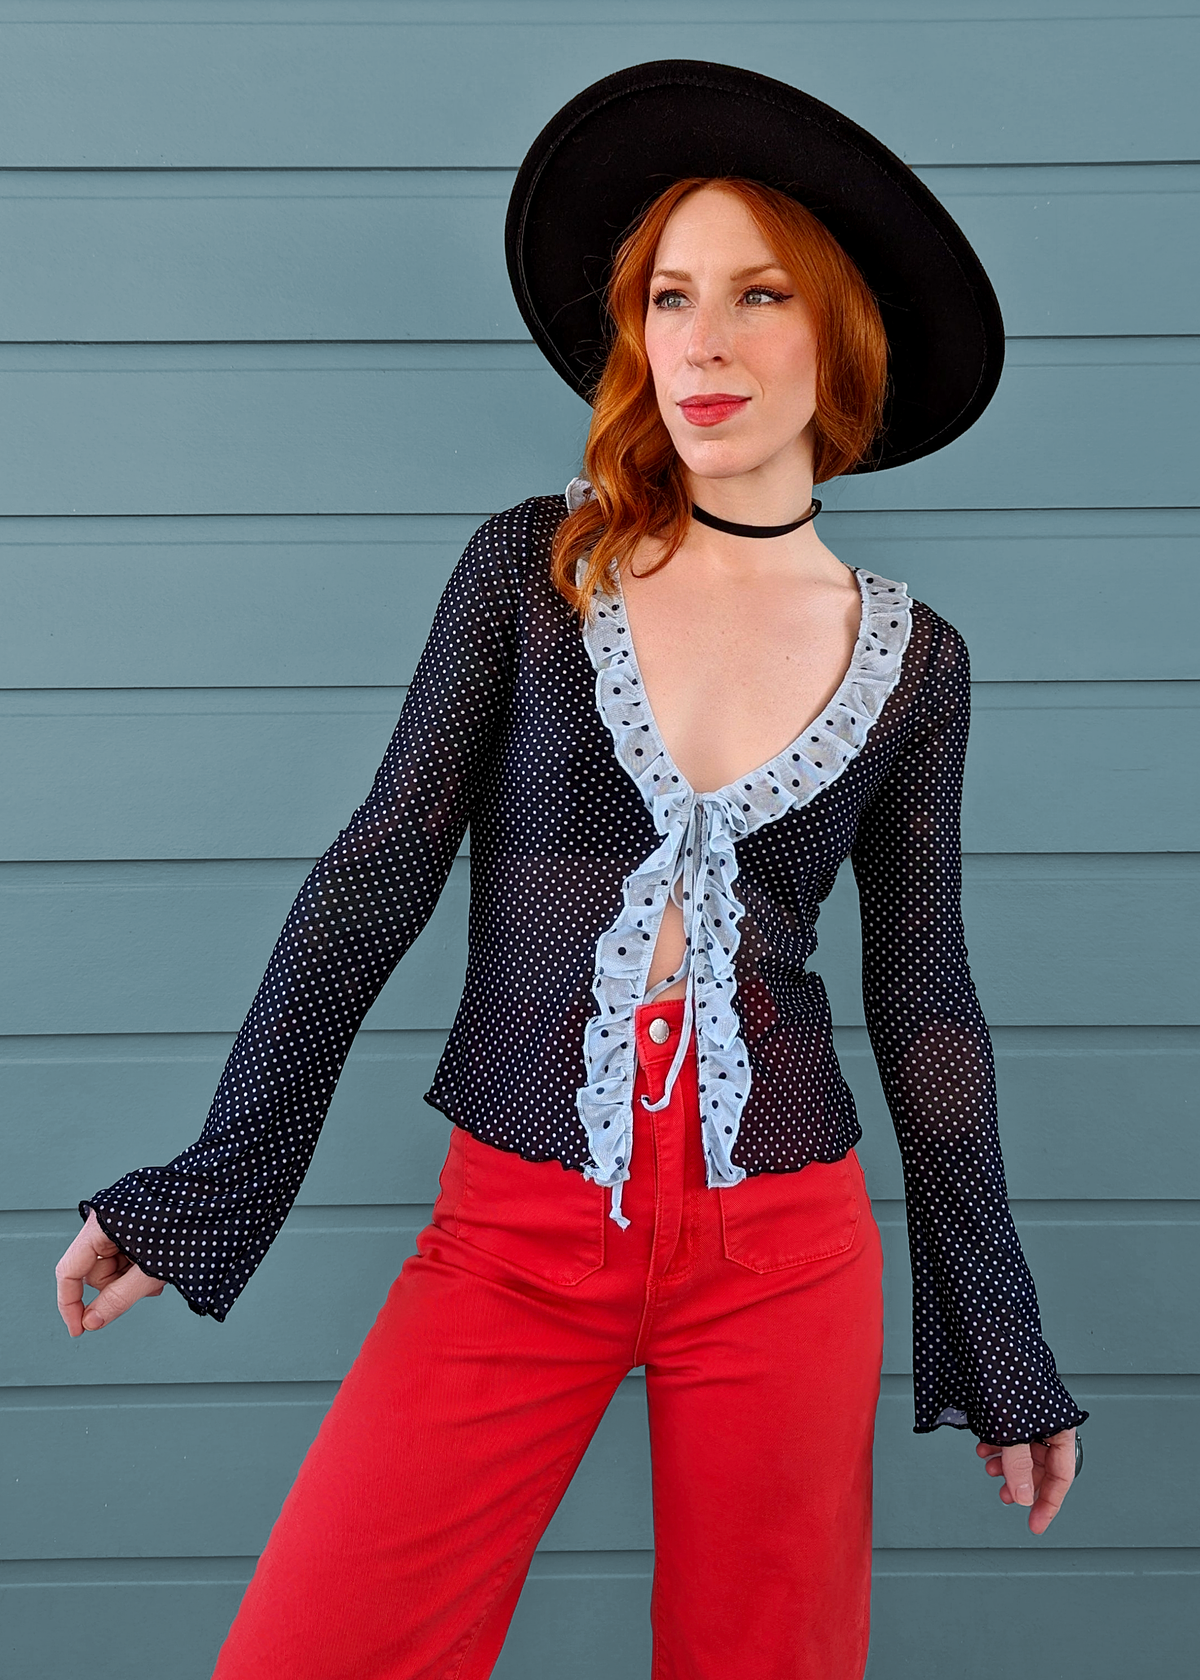 Motel Rocks slinky black and sky blue mesh cardigan top with long fluted bell sleeves and tie front closure. Polka dot design with ruffled neckline. 